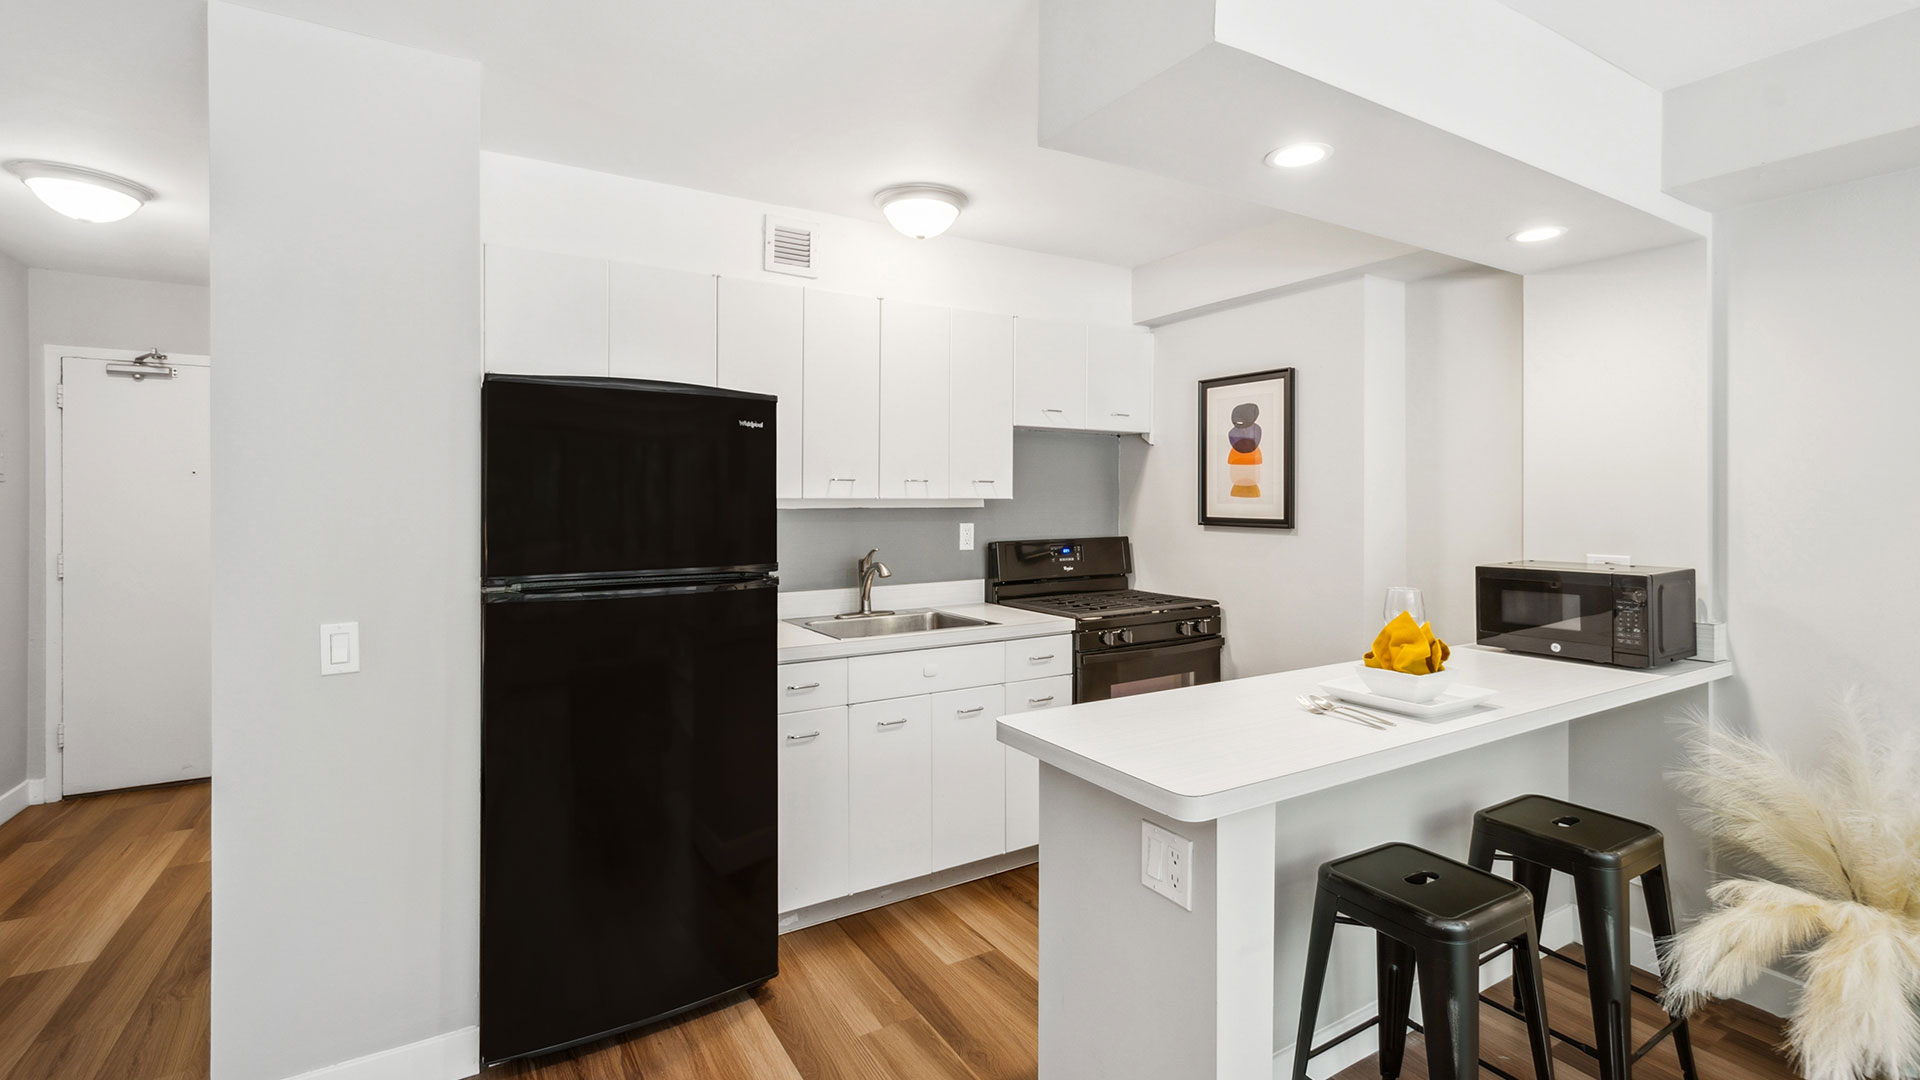 Modern kitchen with white cabinets, black appliances, a breakfast bar with two stools, and a wooden floor. A microwave and a framed art piece are visible, enhancing the minimalist decor.